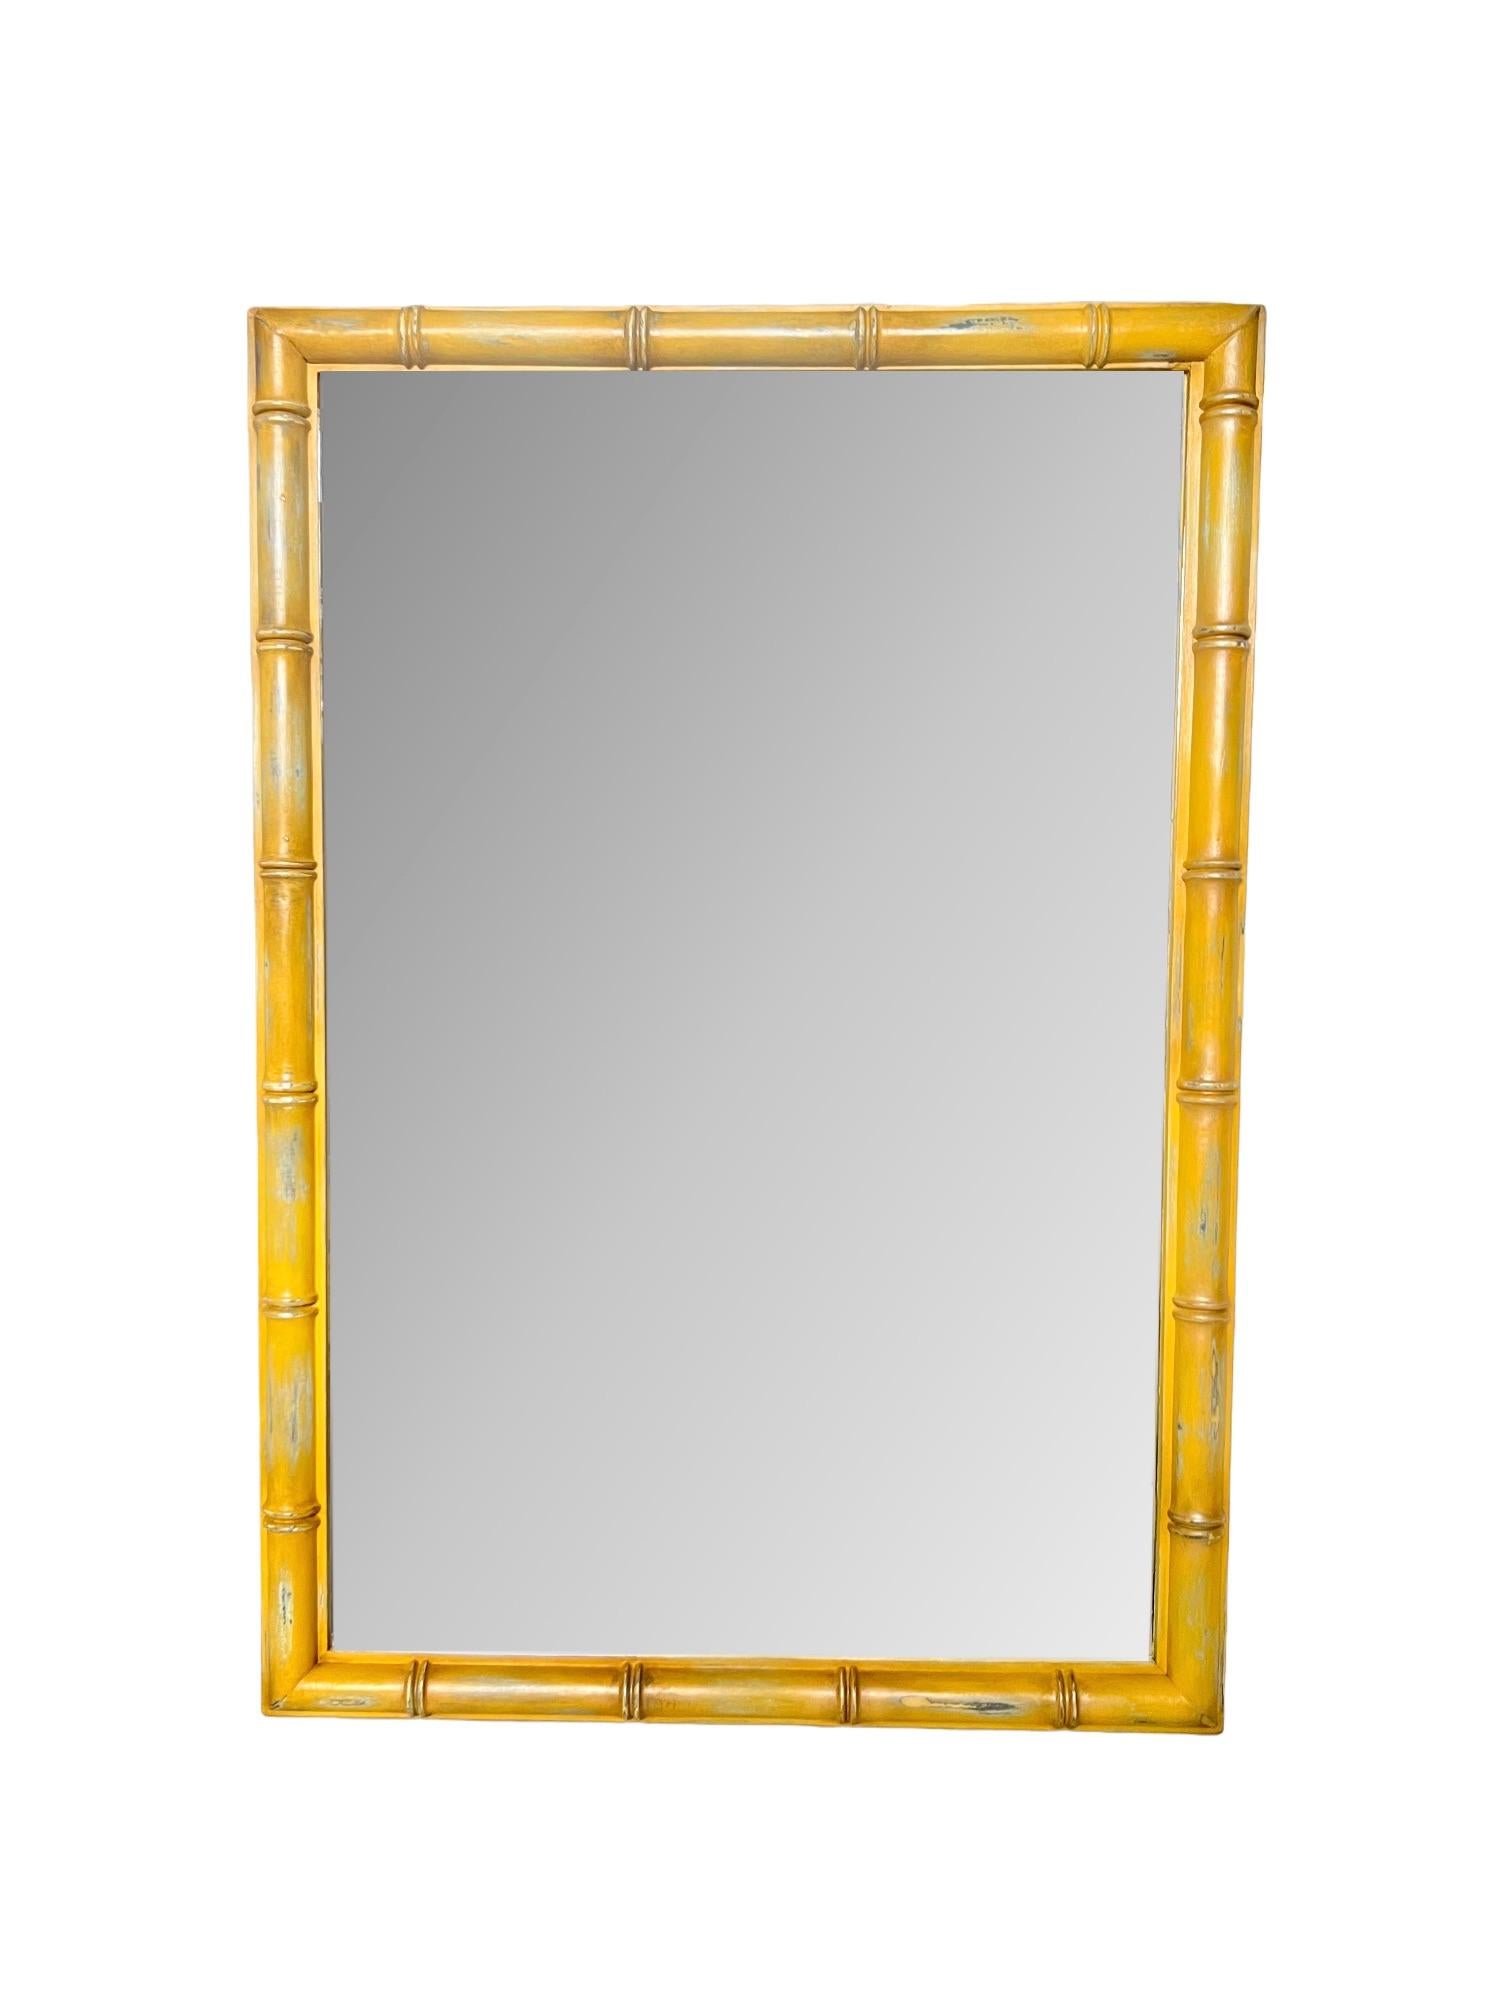 This vintage 1970's Dixie Furniture Palm Beach regency faux bamboo wall mirror has been custom refinished in a distressed satin mustard yellow with gray & cream undertones, dark wax details and pearlescent & gold highlights.

Dimensions: 27